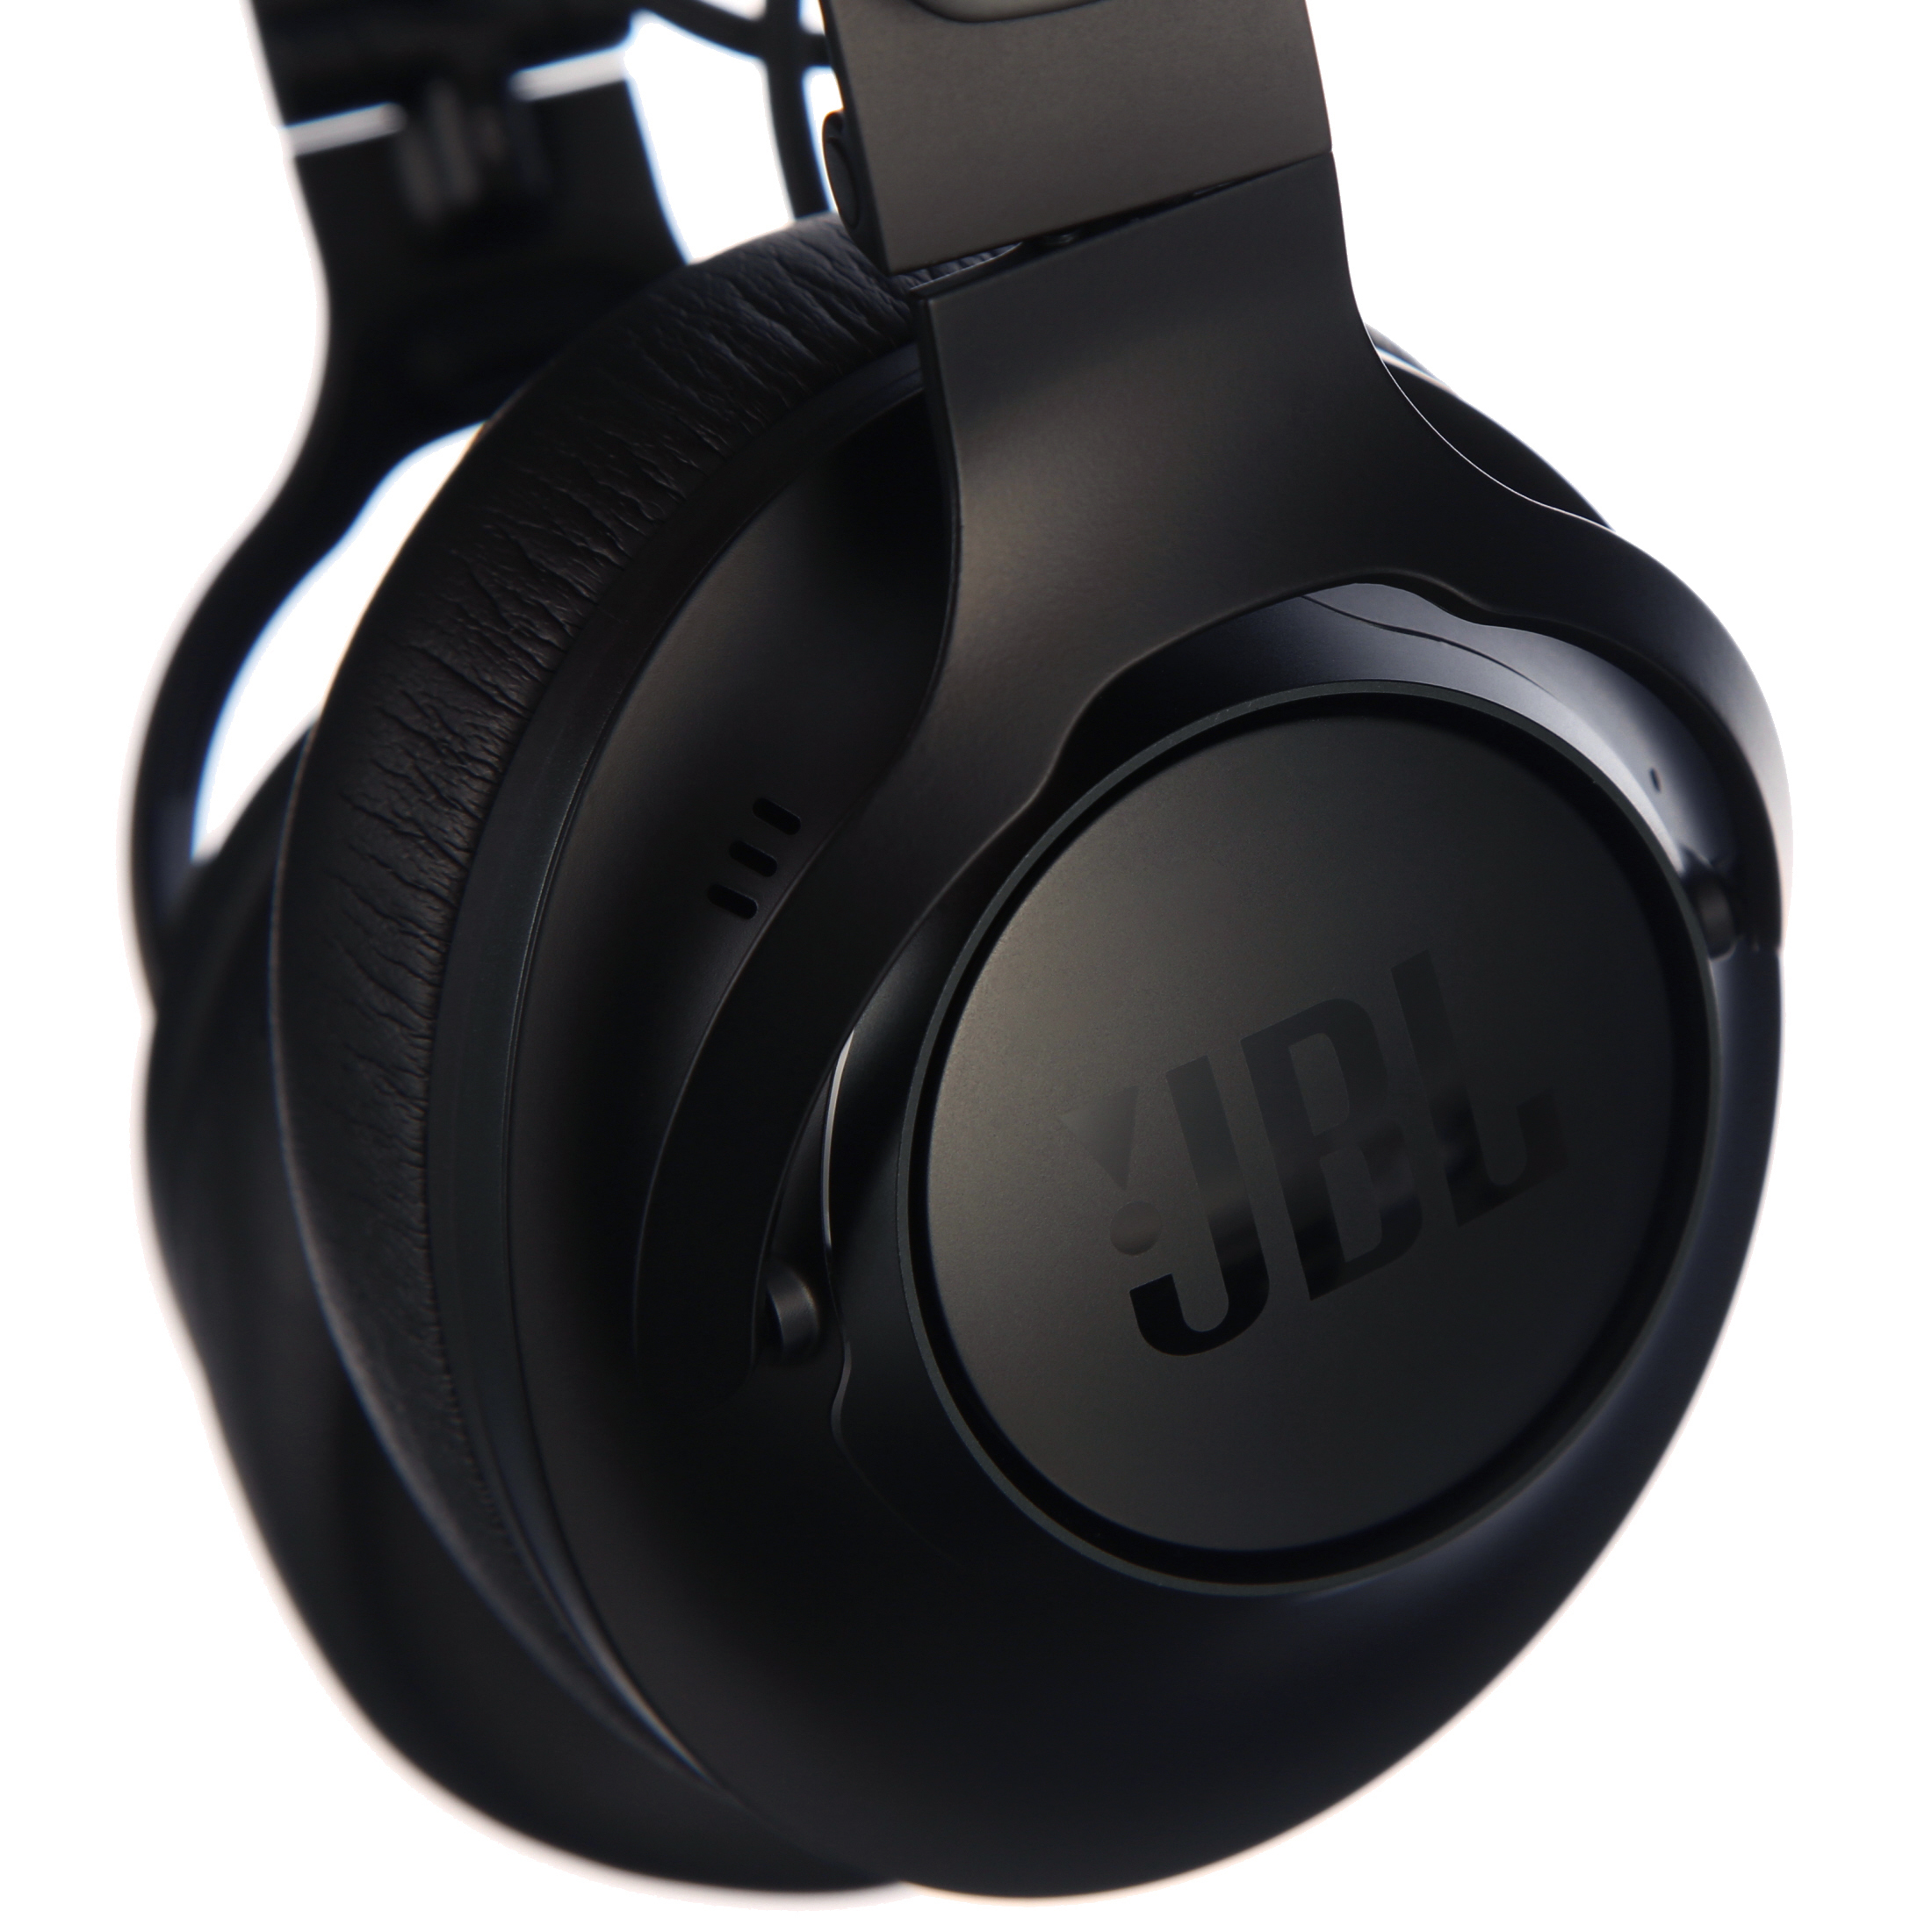 JBL Club ONE Wireless Over-Ear Headphones with Noise Cancelling (Black) - image 5 of 9